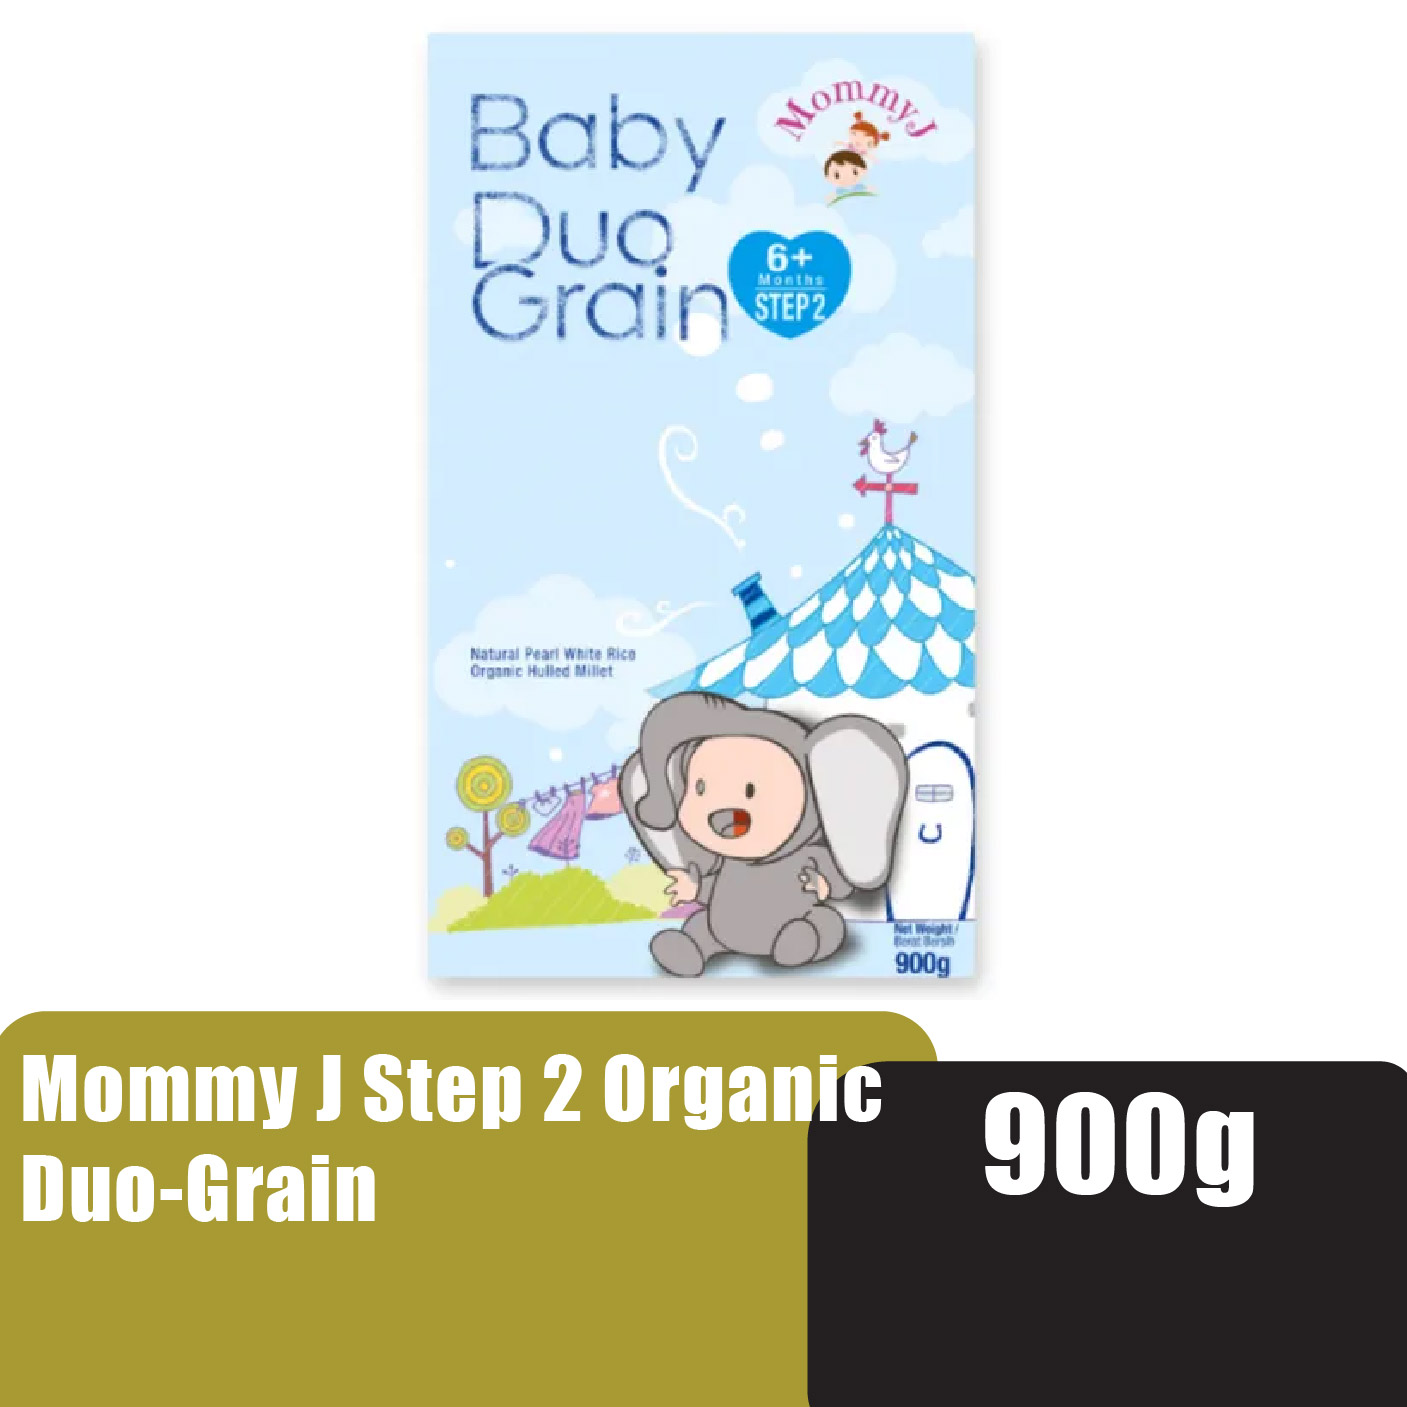 MOMMY J Step 2 Organic Duo-Grain 900g - Halal Baby Food, Makanan Baby for 6+ Months